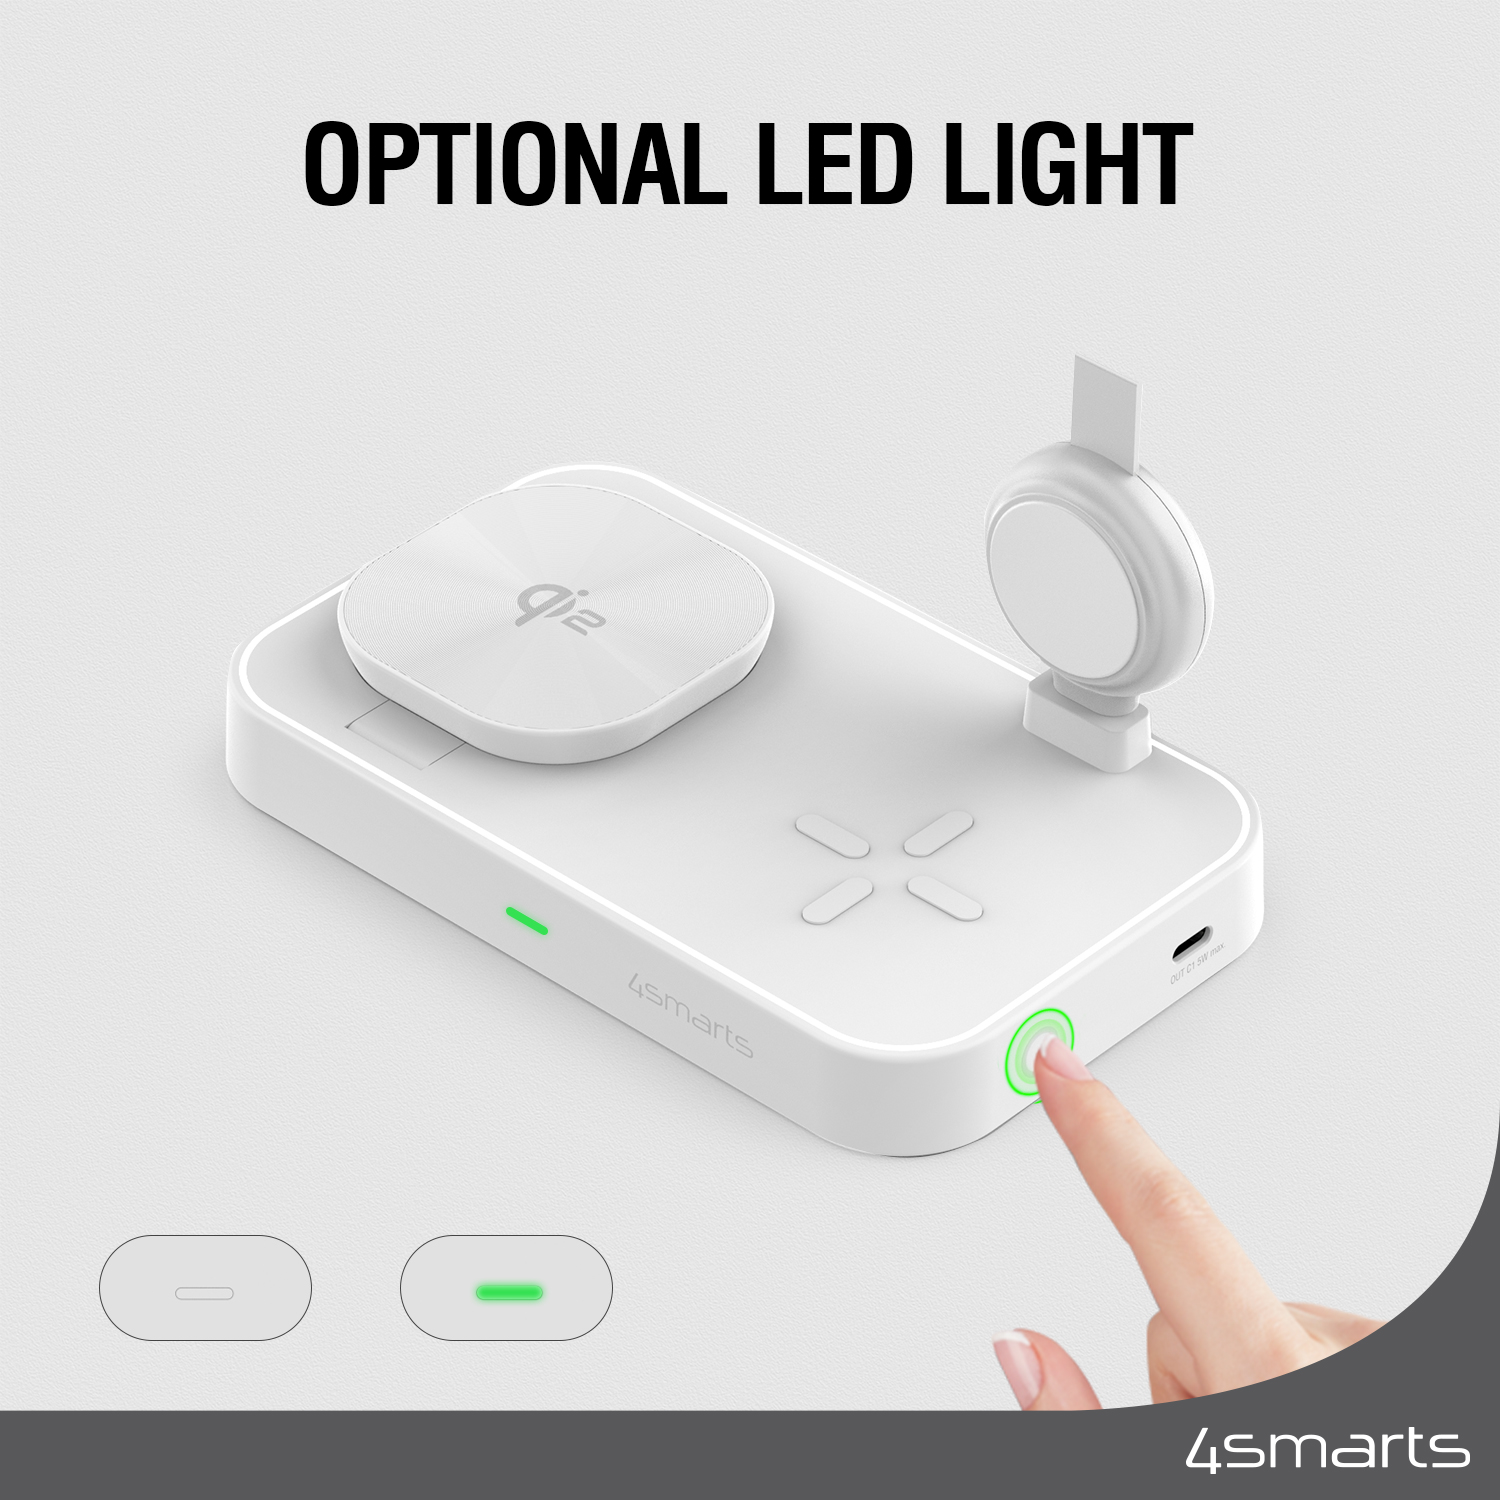 The integrated operating light (LED) of the 4smarts Qi2 Trident charging station can be switched off if necessary.